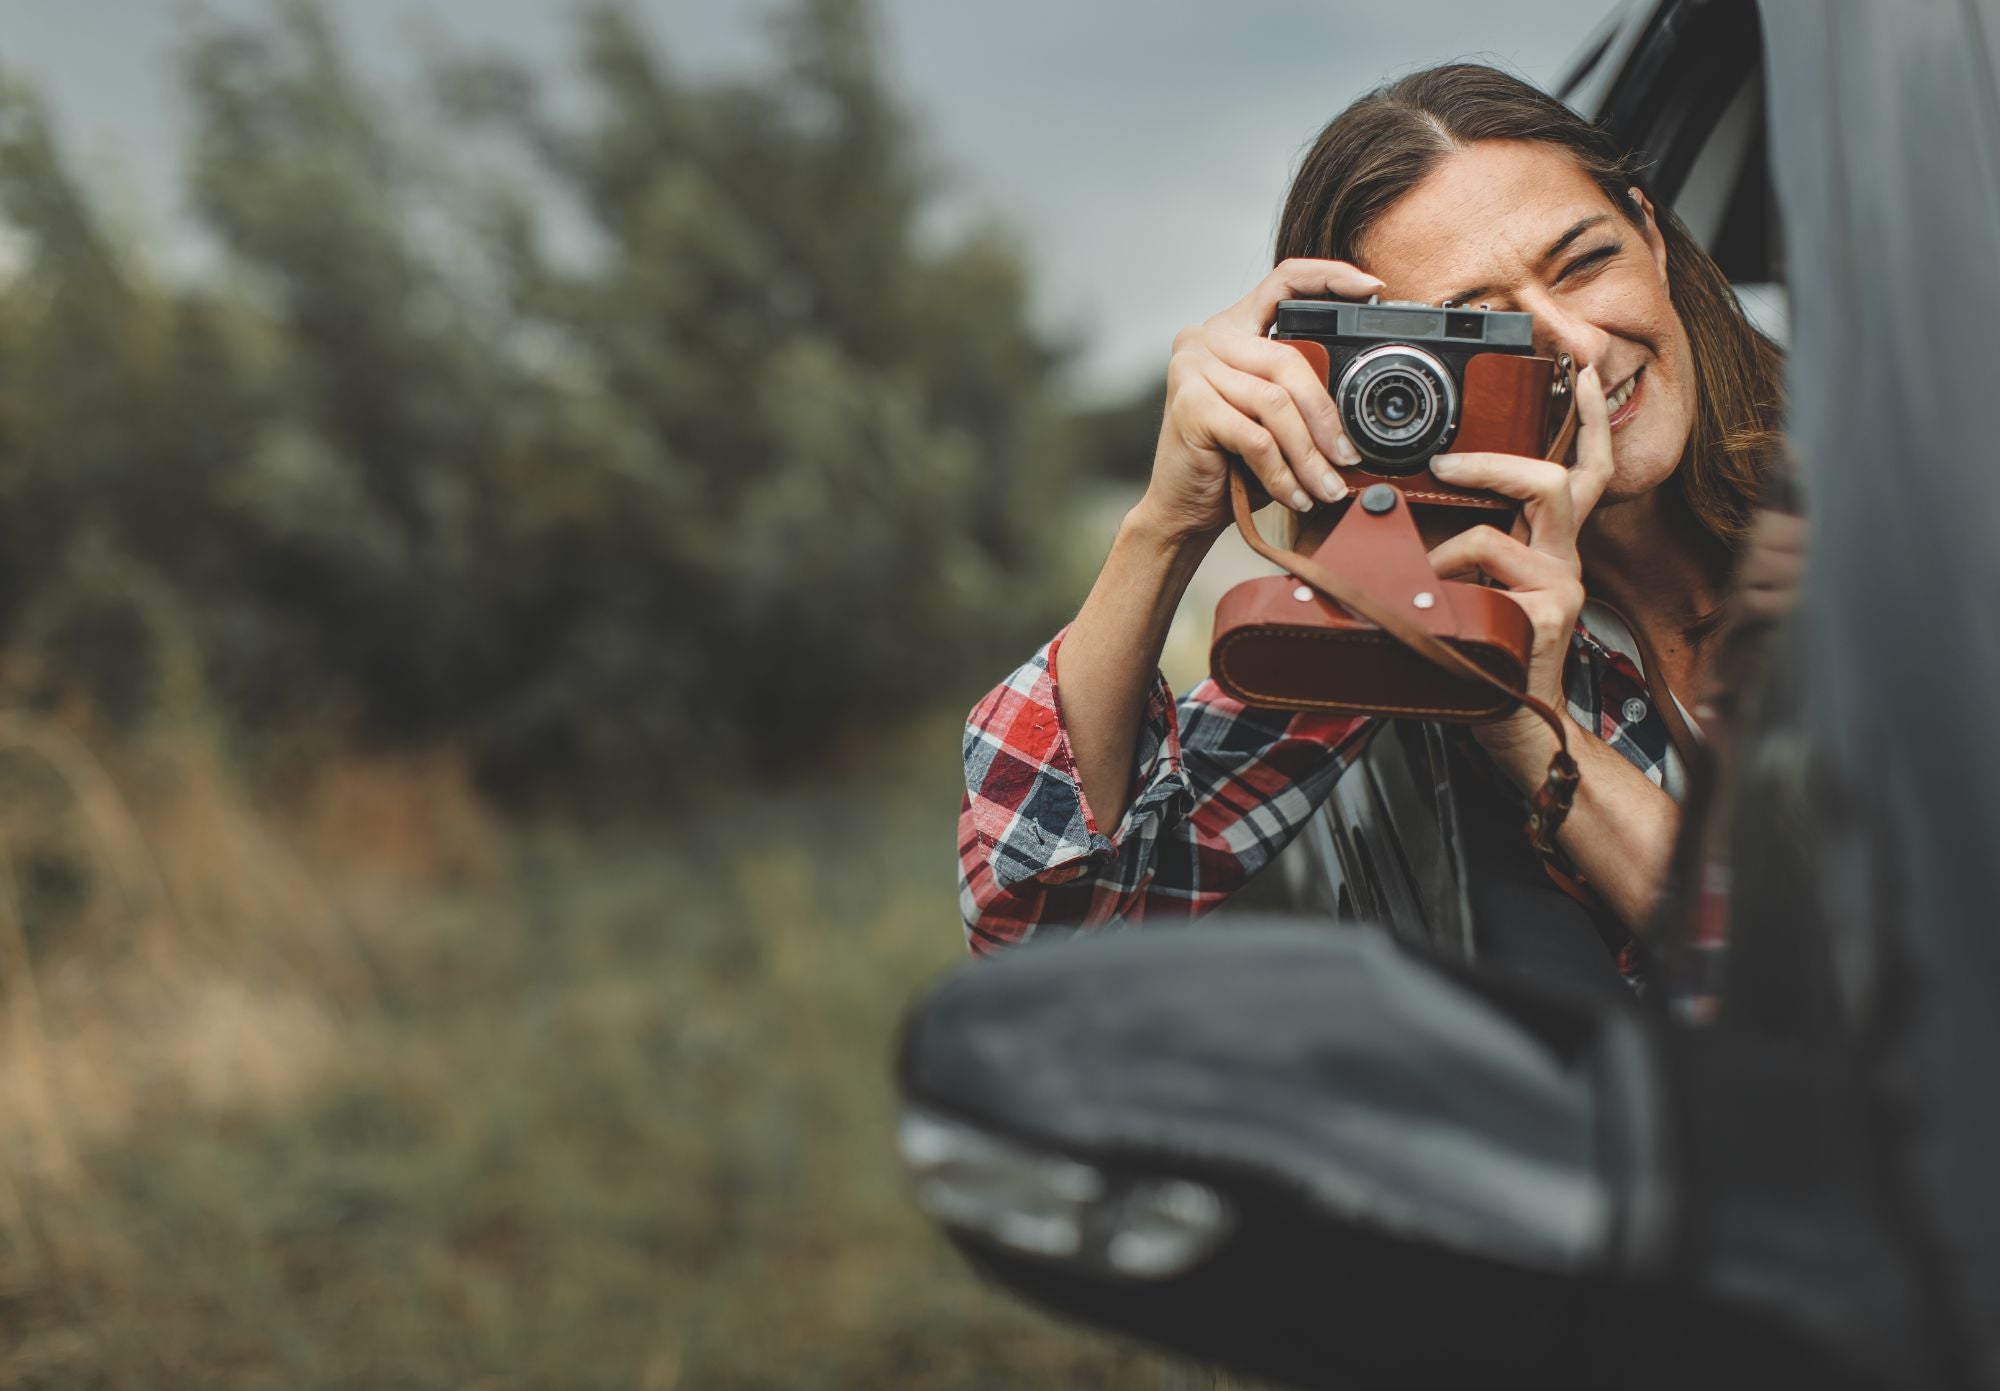 Women's Guide to Travel Photography in May: Tips for Capturing Beautiful Memories